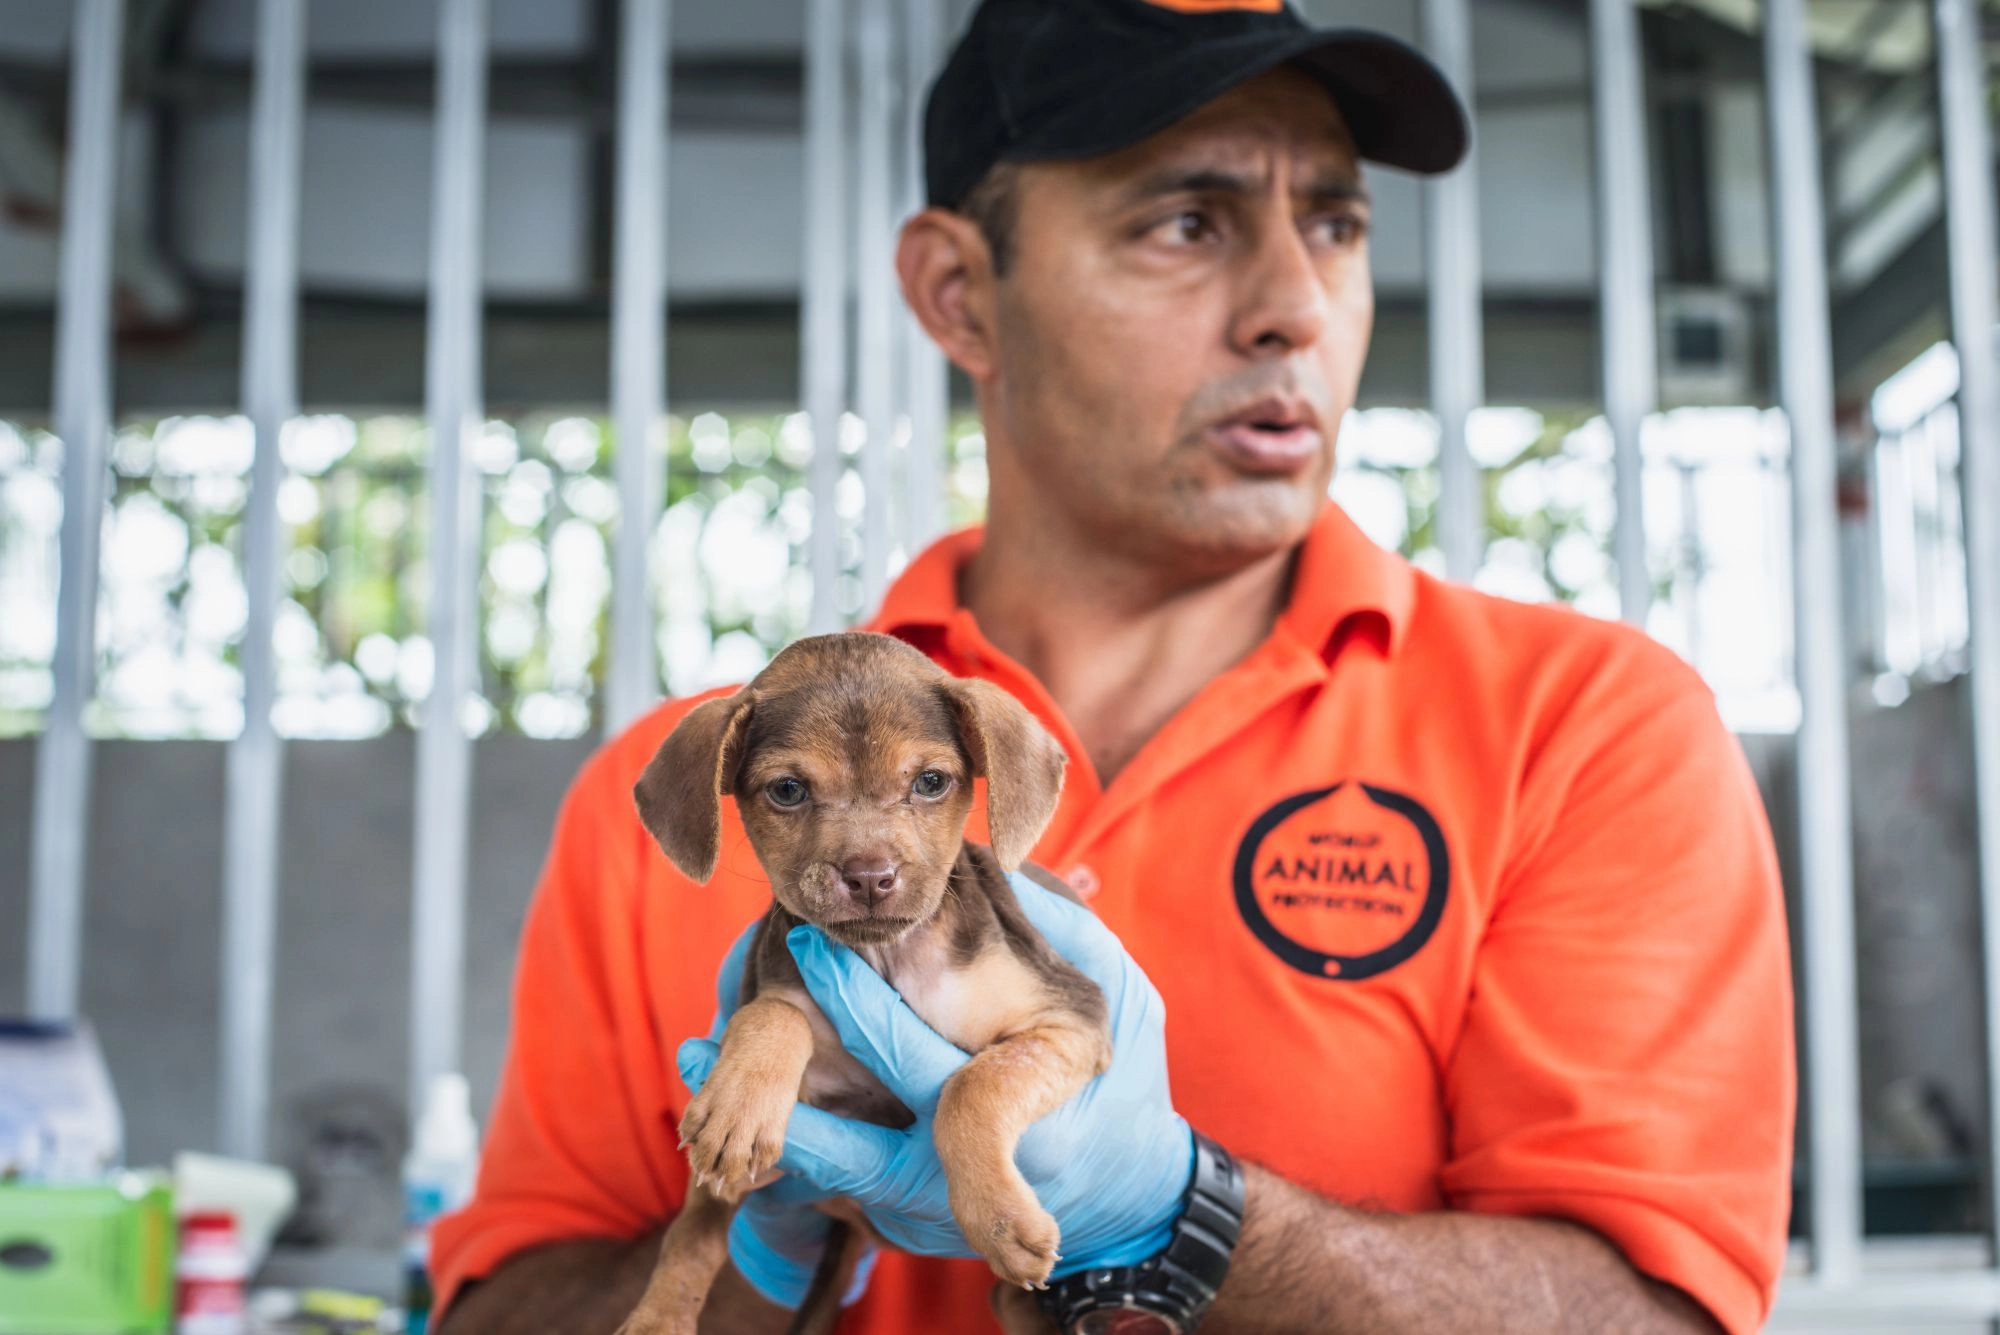 World Animal Protection disaster response officer holding a puppy dog